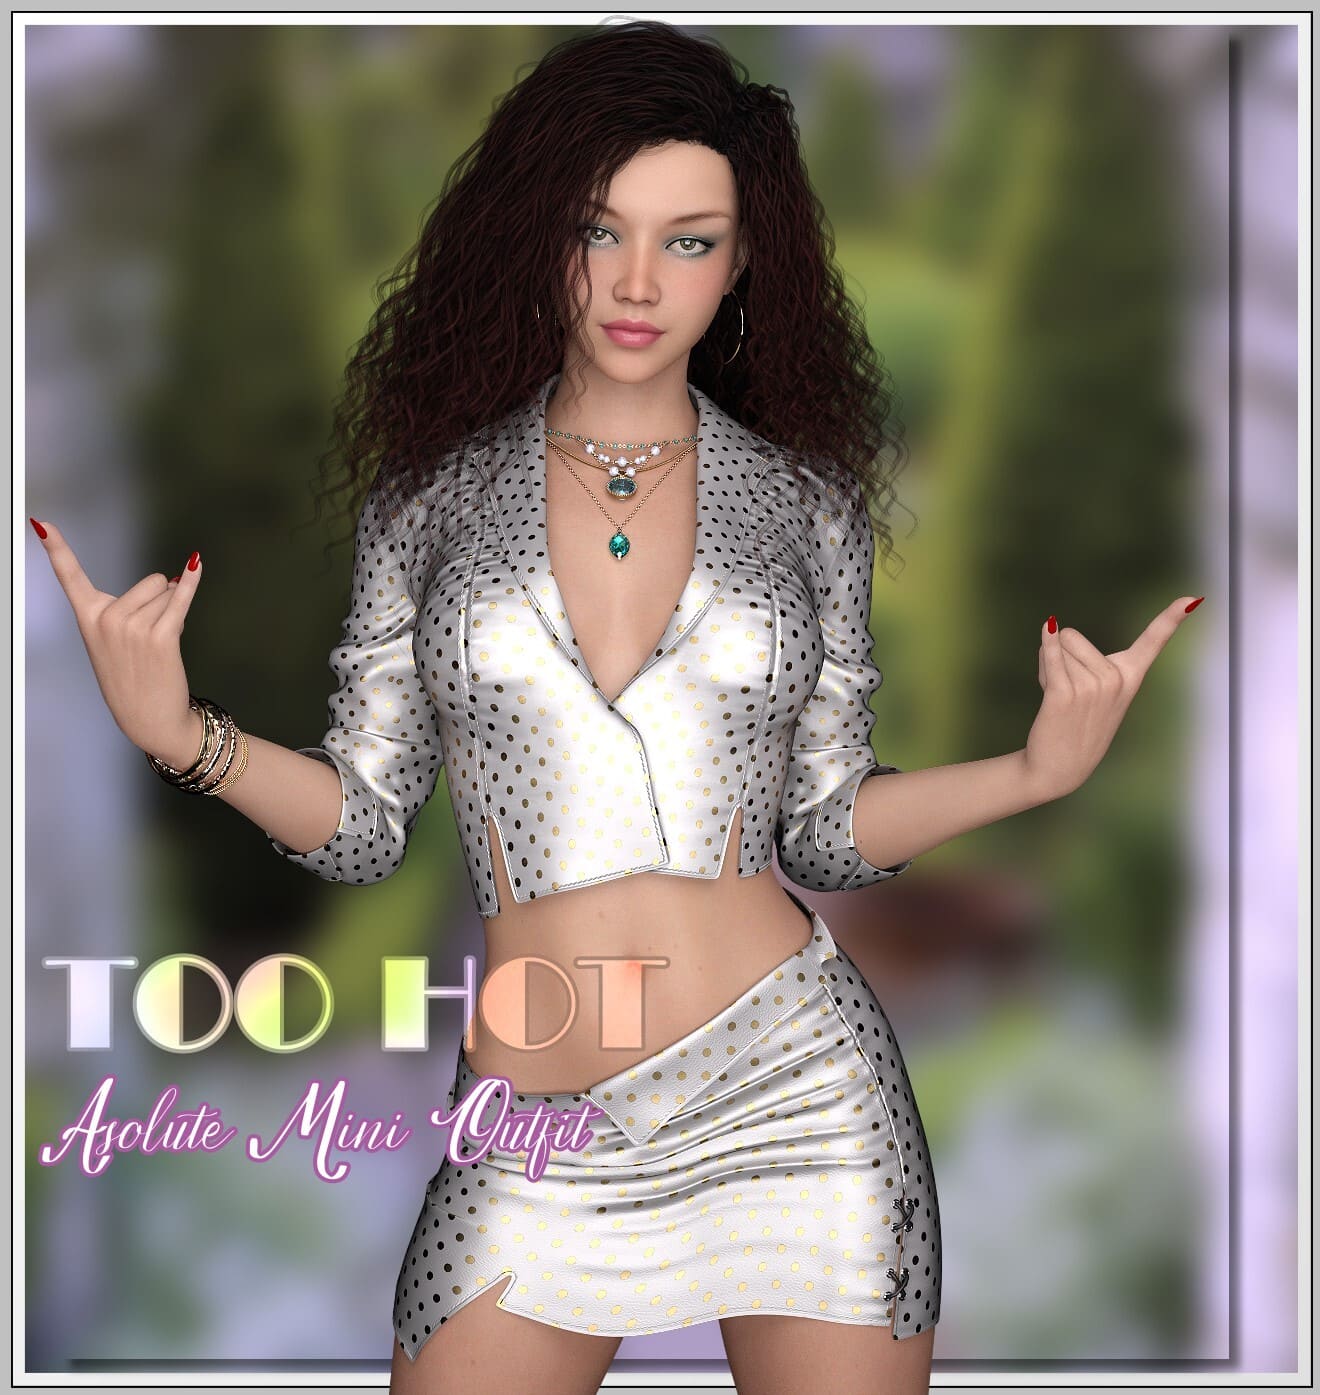 Too Hot -Absolute Mini Outfit_DAZ3D下载站